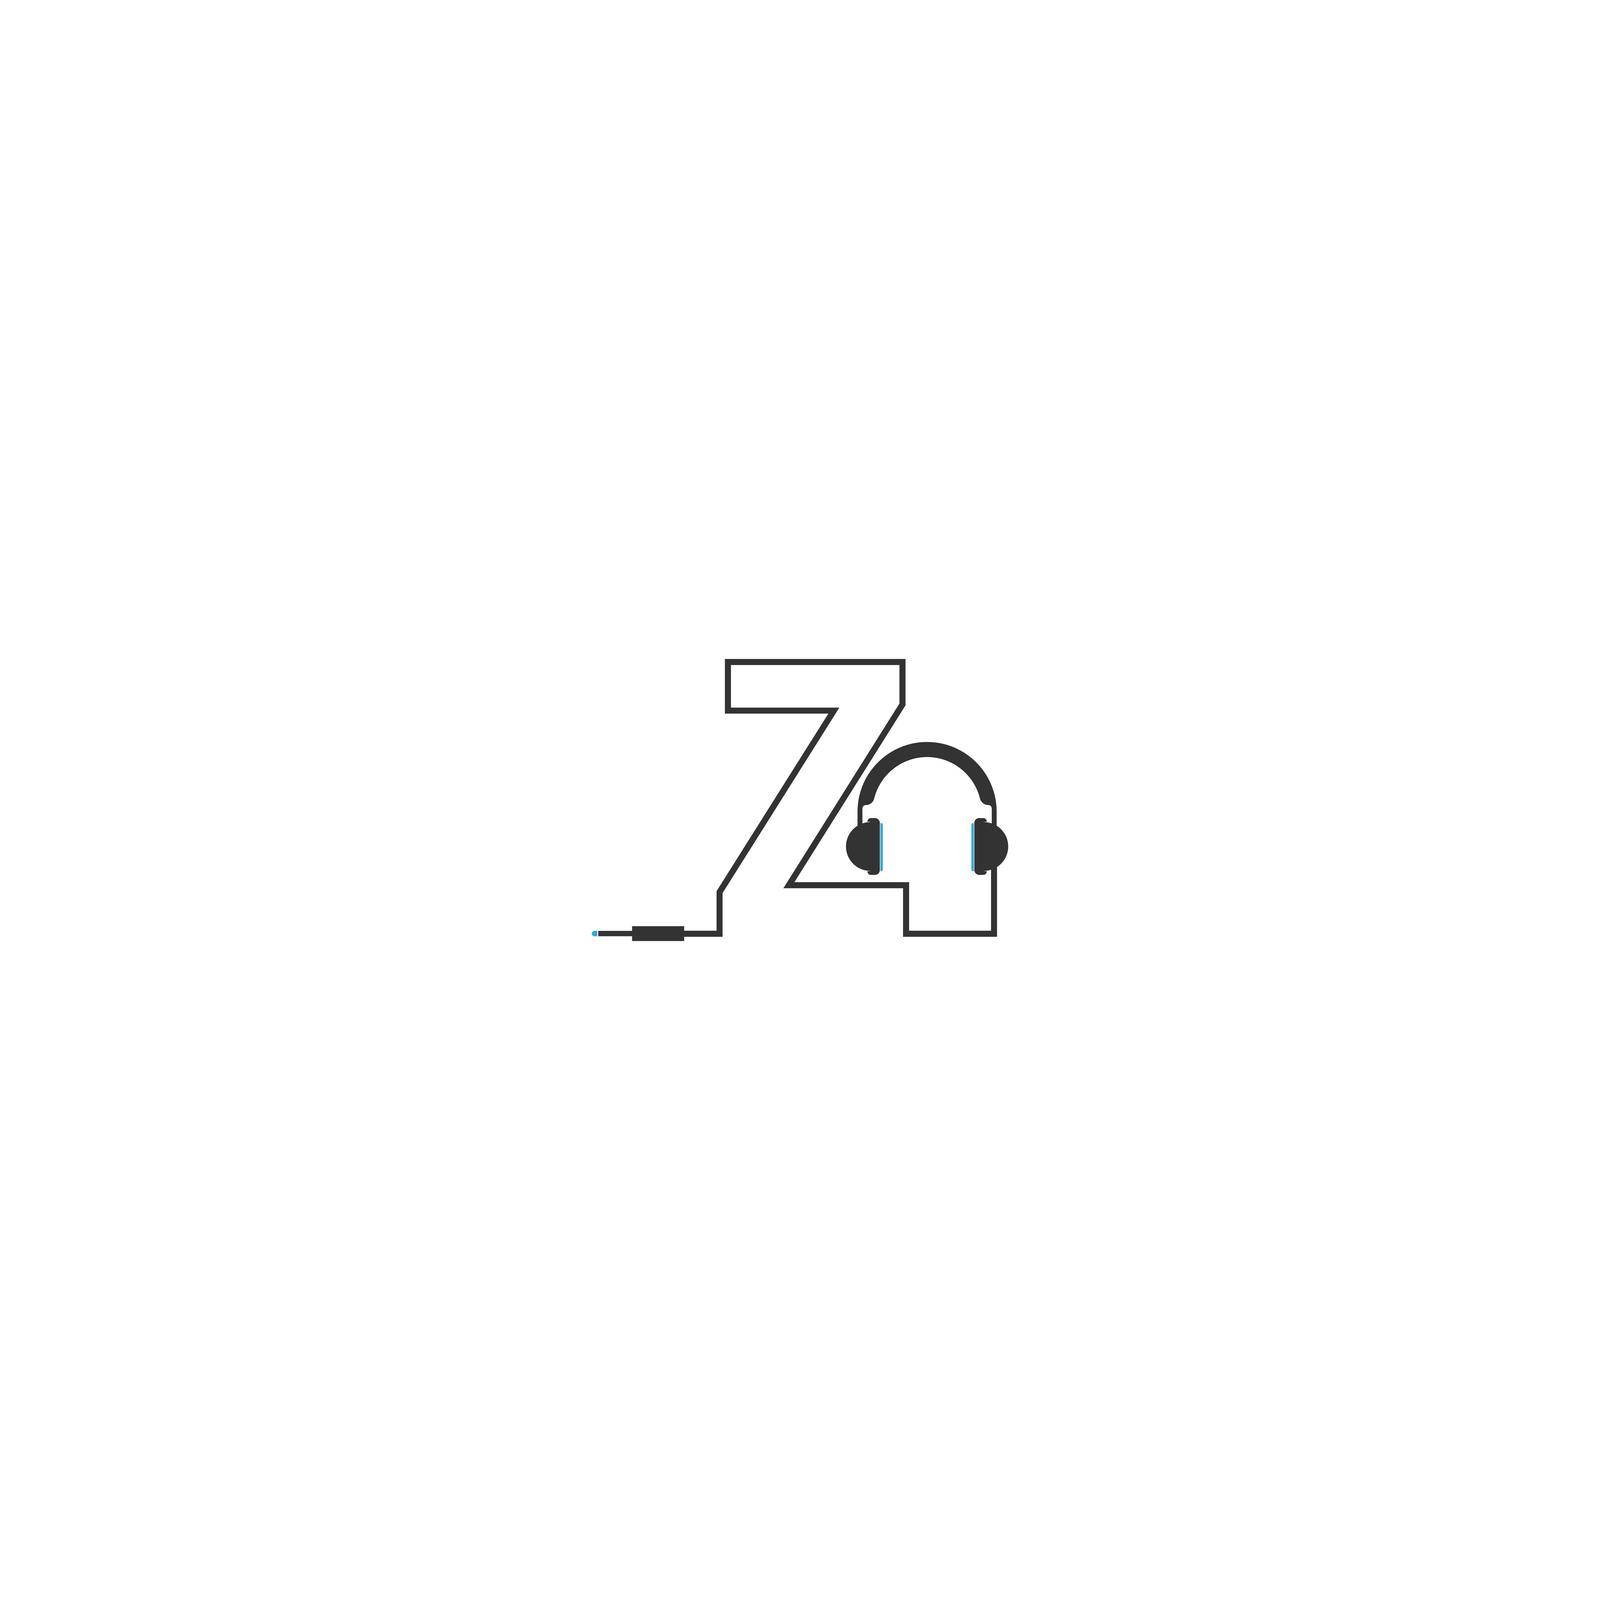 Letter Z and podcast logotype combination design concept